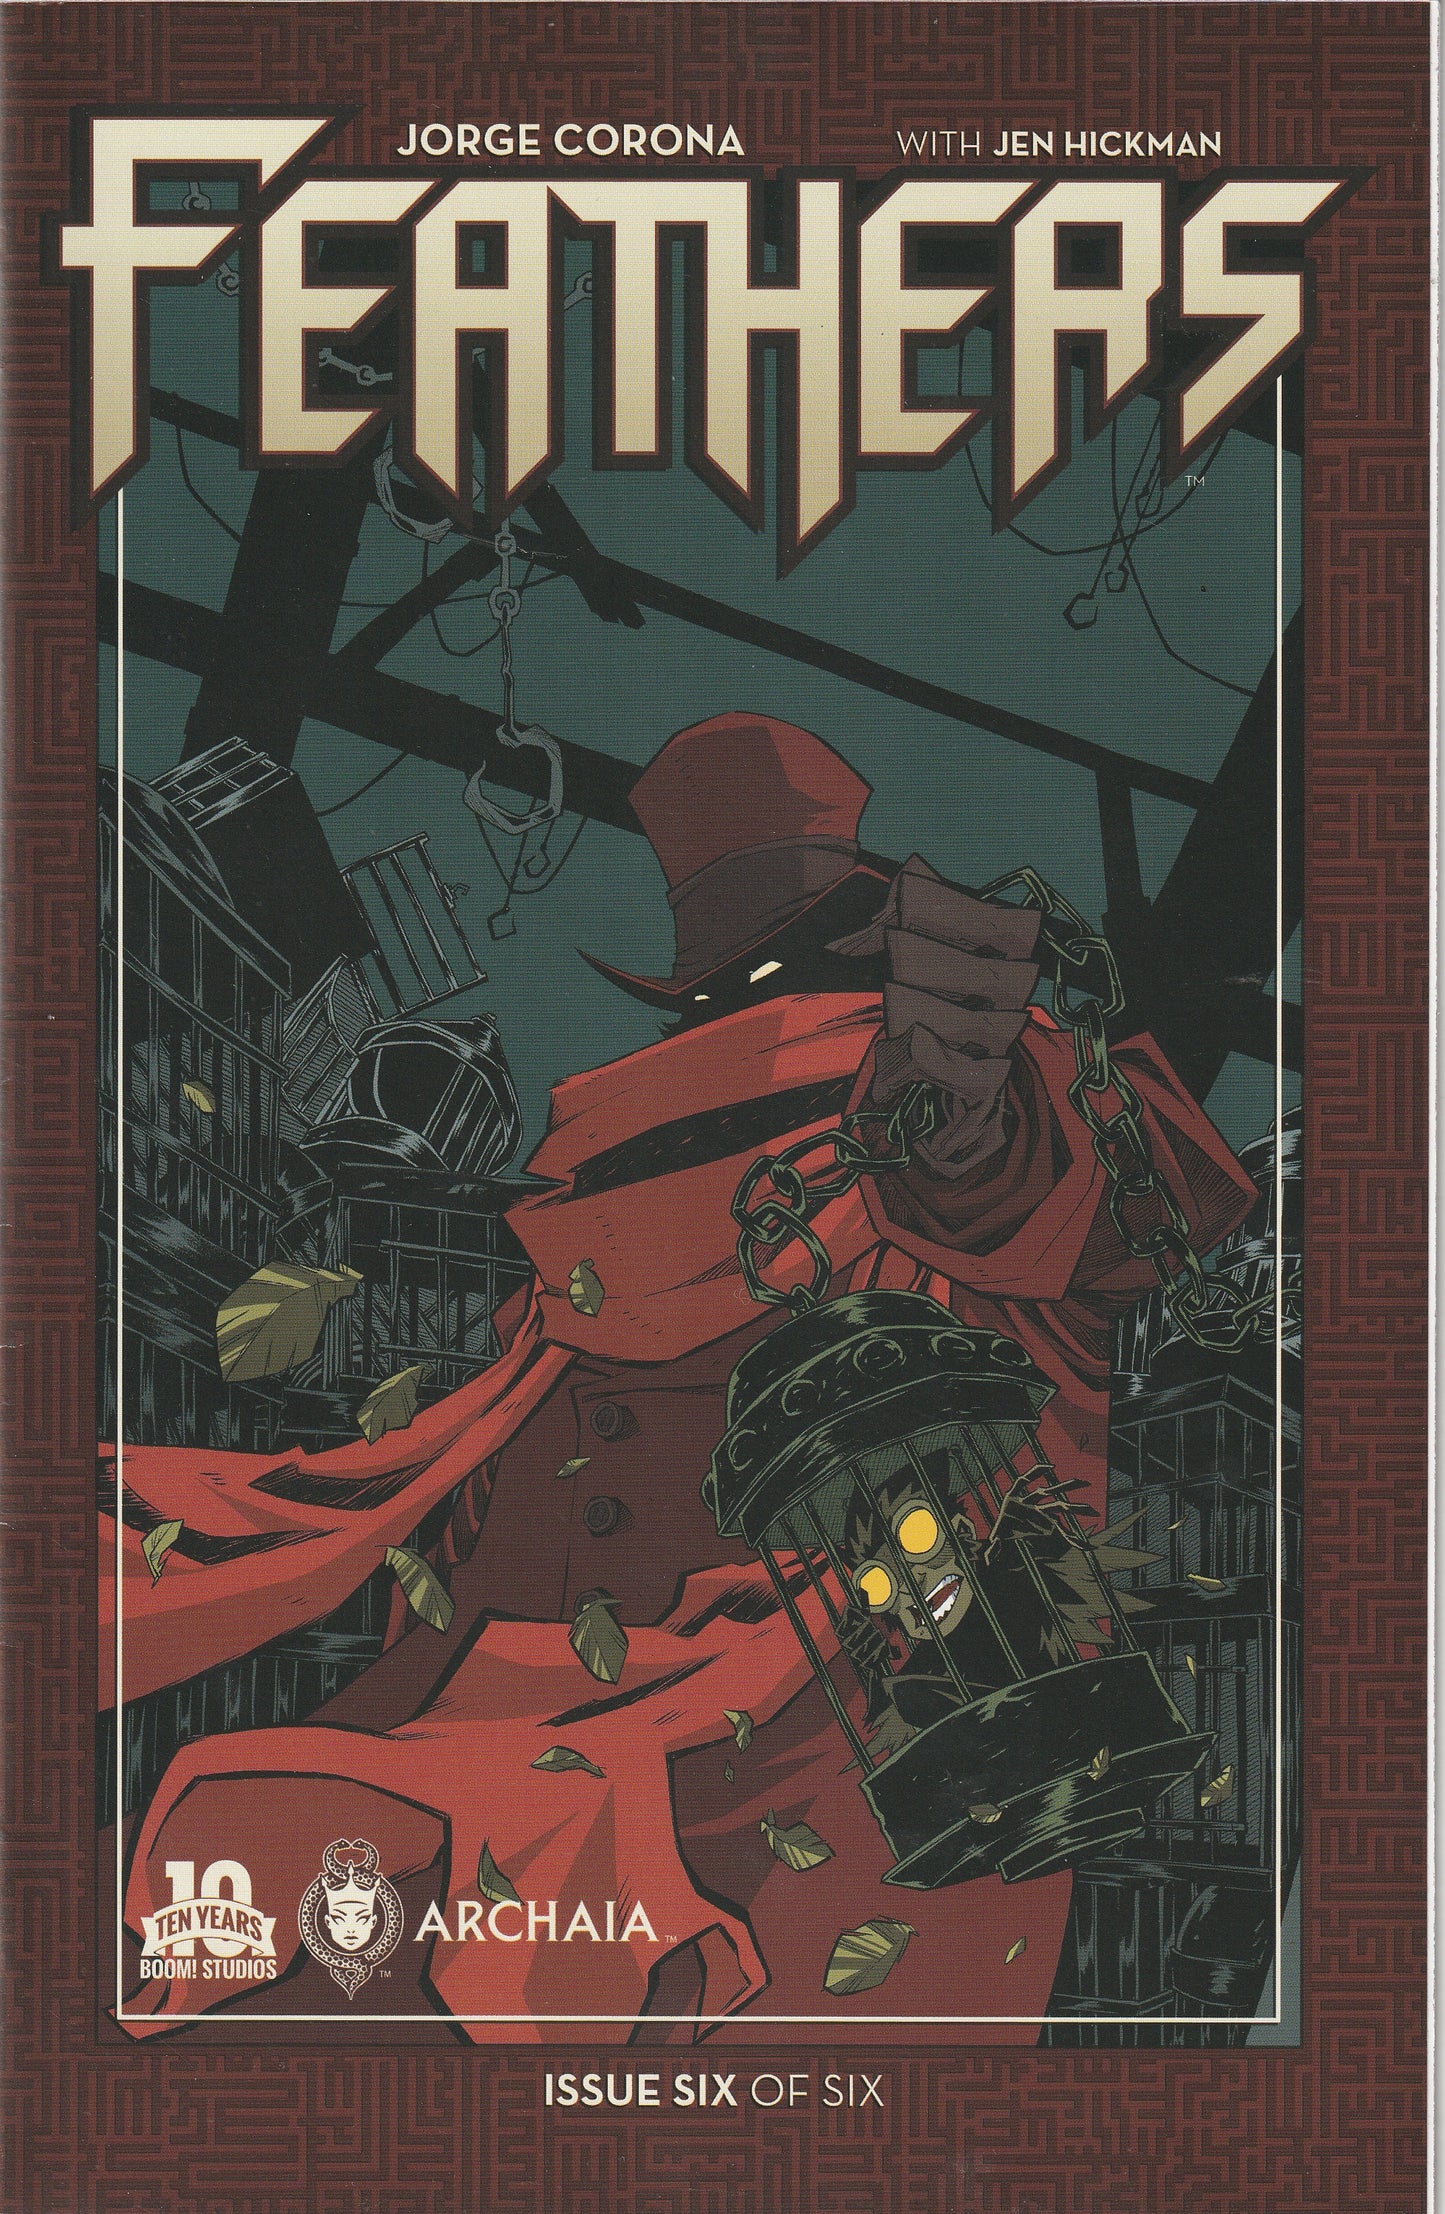 Feathers (2015) - 6 issue mini series